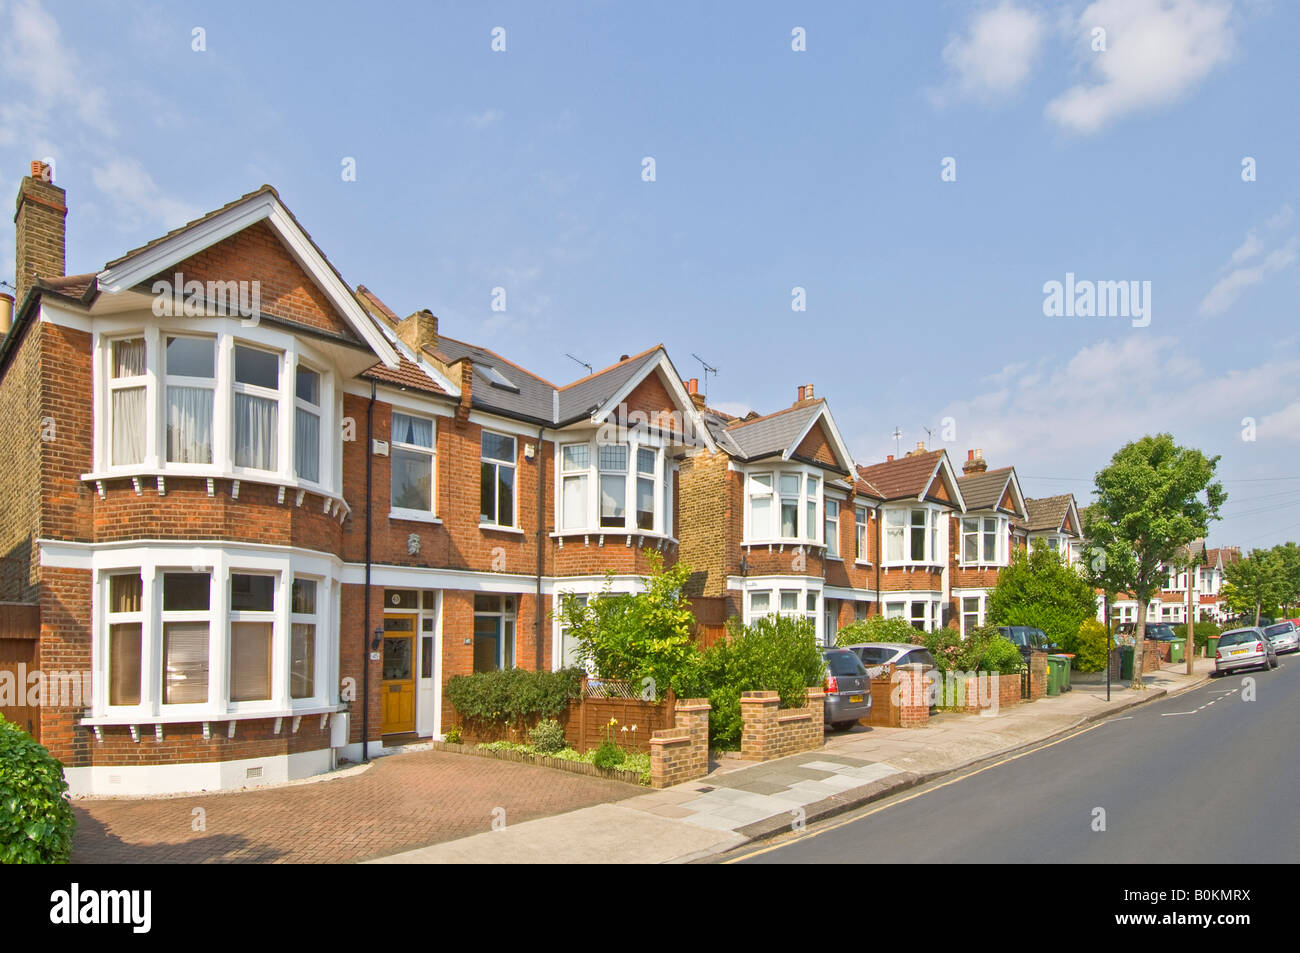 A row of typical 3 bed semi detached Victorian/Edwardian houses in suburbia. Stock Photo